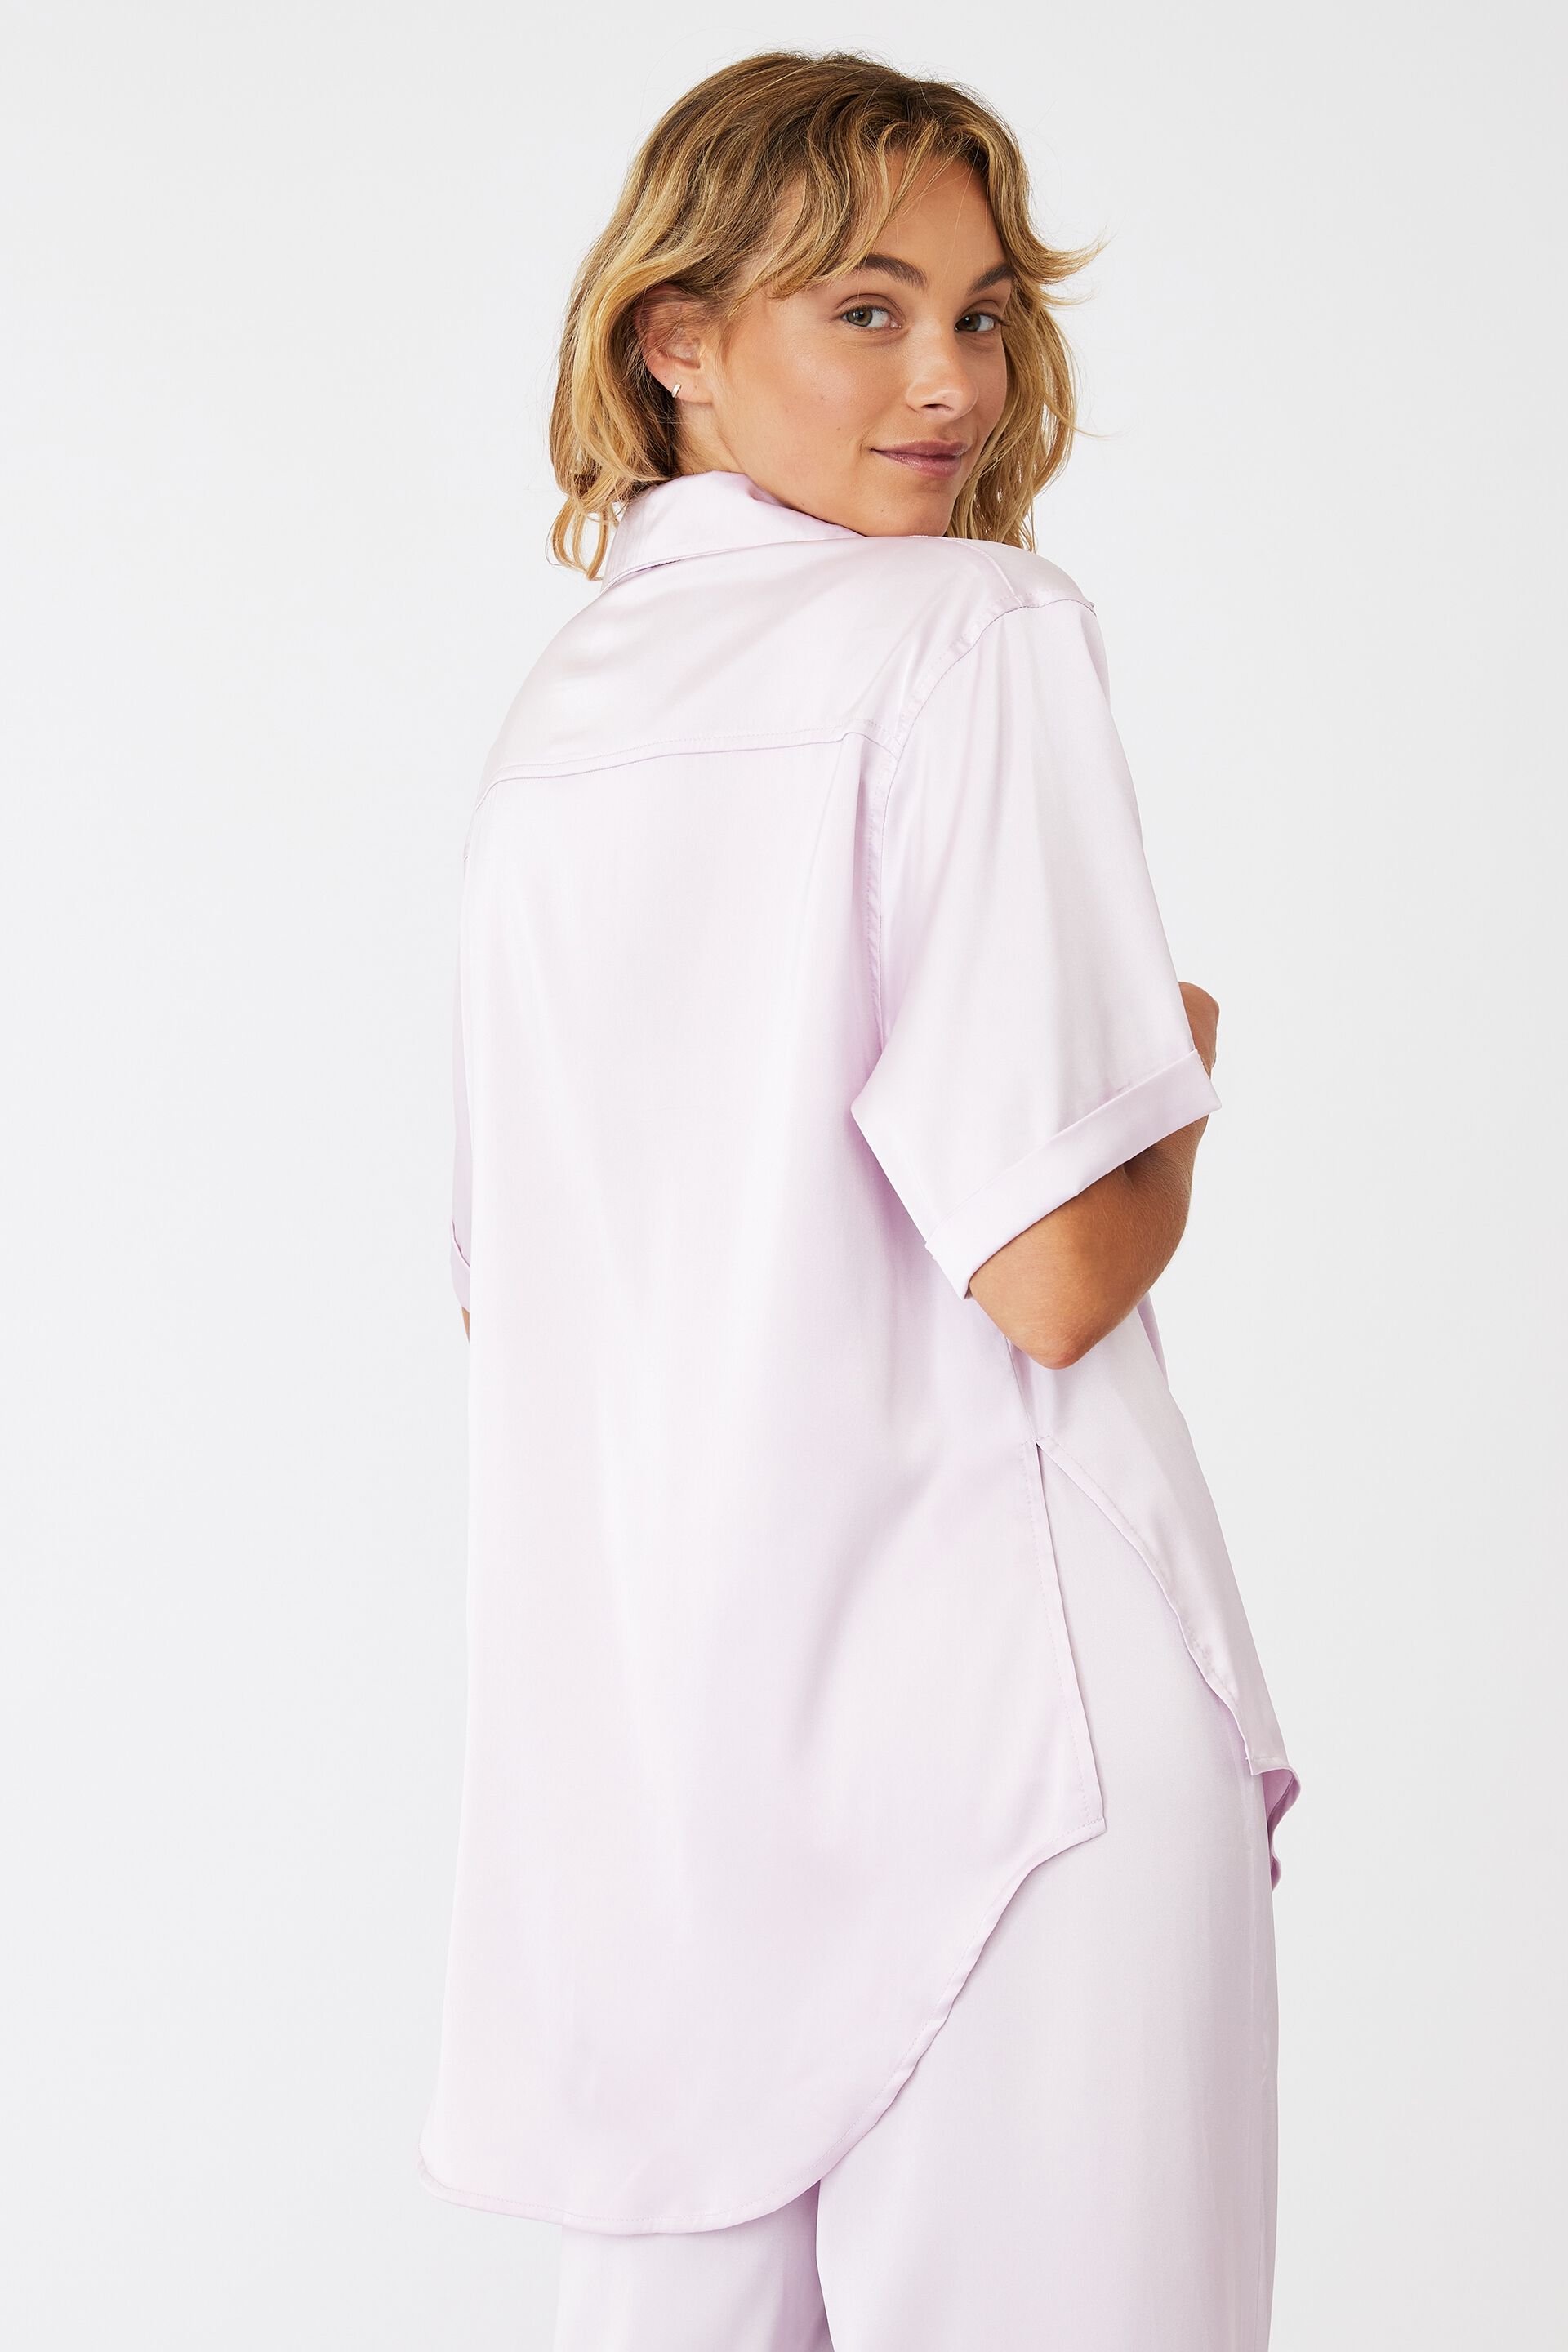 Gifts Gifts For Her | Short Sleeve Satin Sleep Shirt - DQ34415